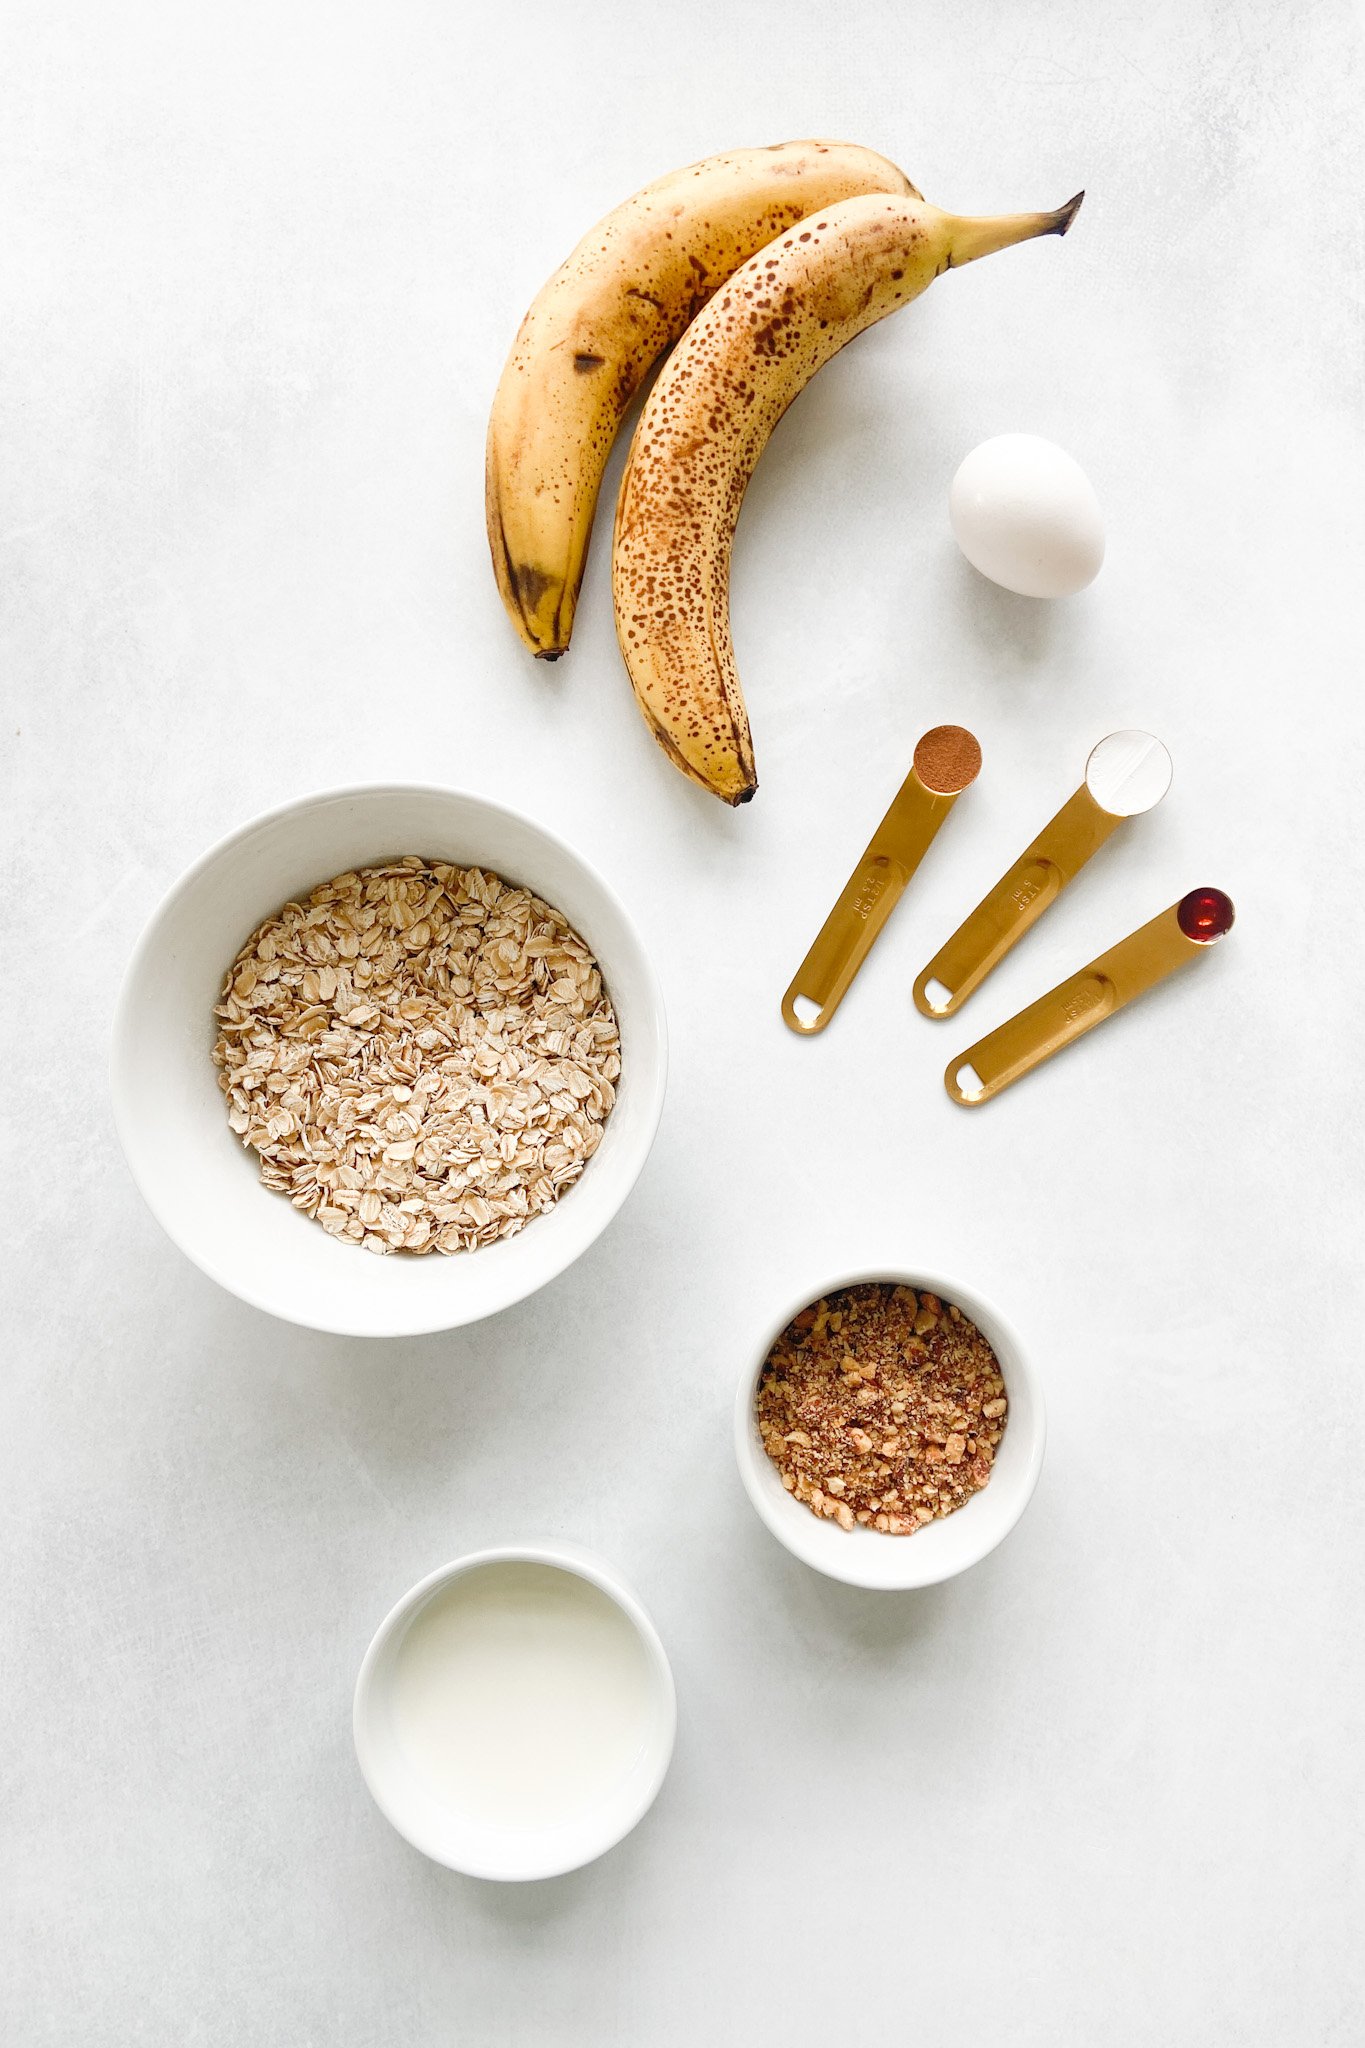 Ingredients to make banana nut muffins. See recipe card for detailed ingredient quantities.